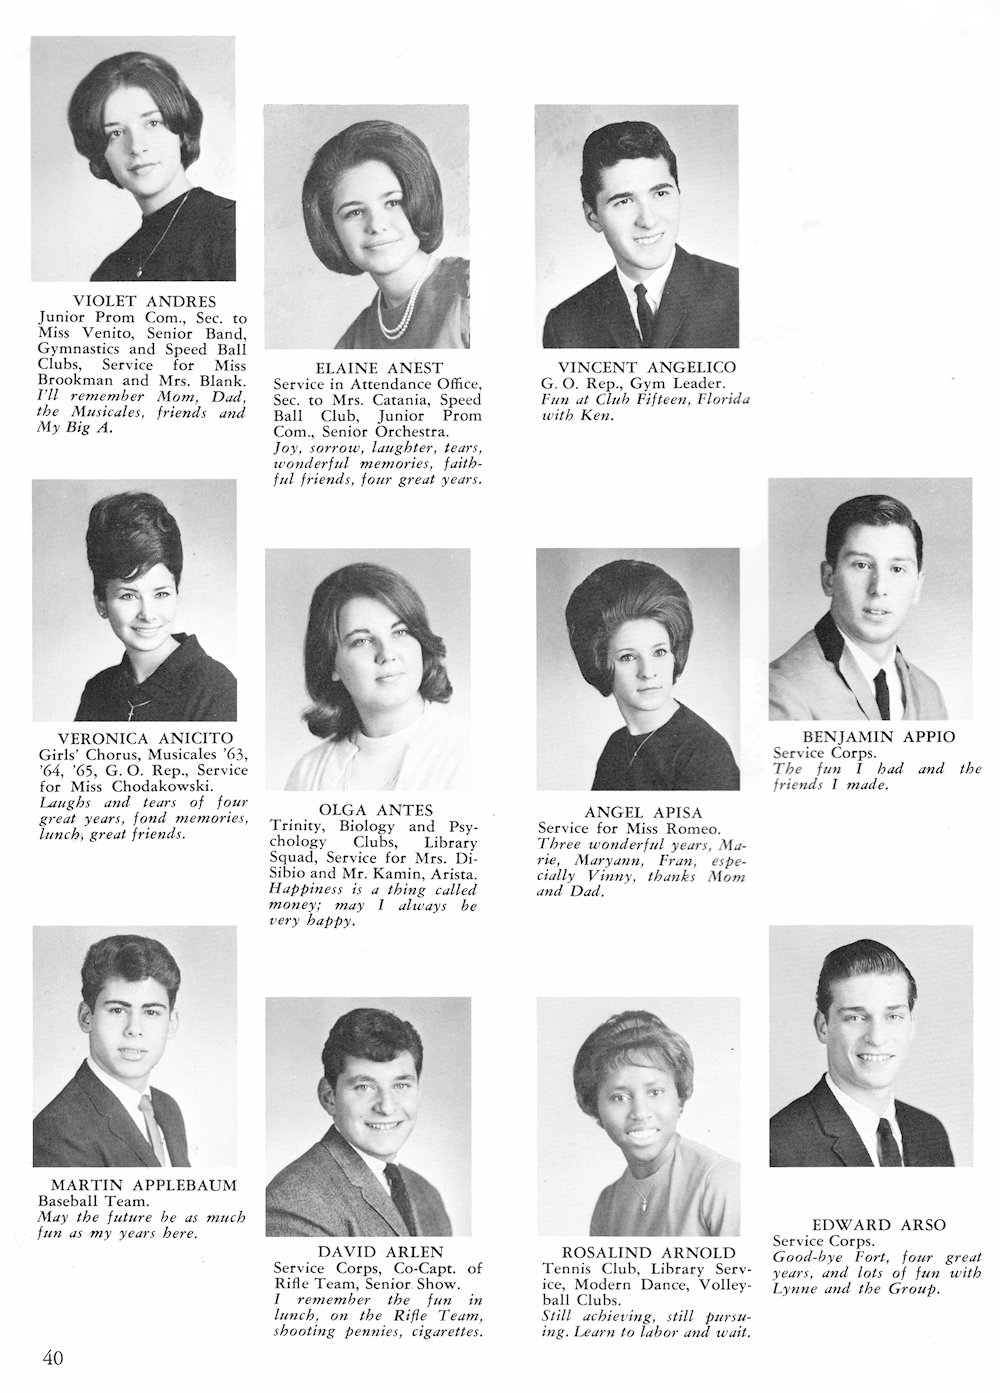 Andres-Arso page from Fort Hamilton High School 1965